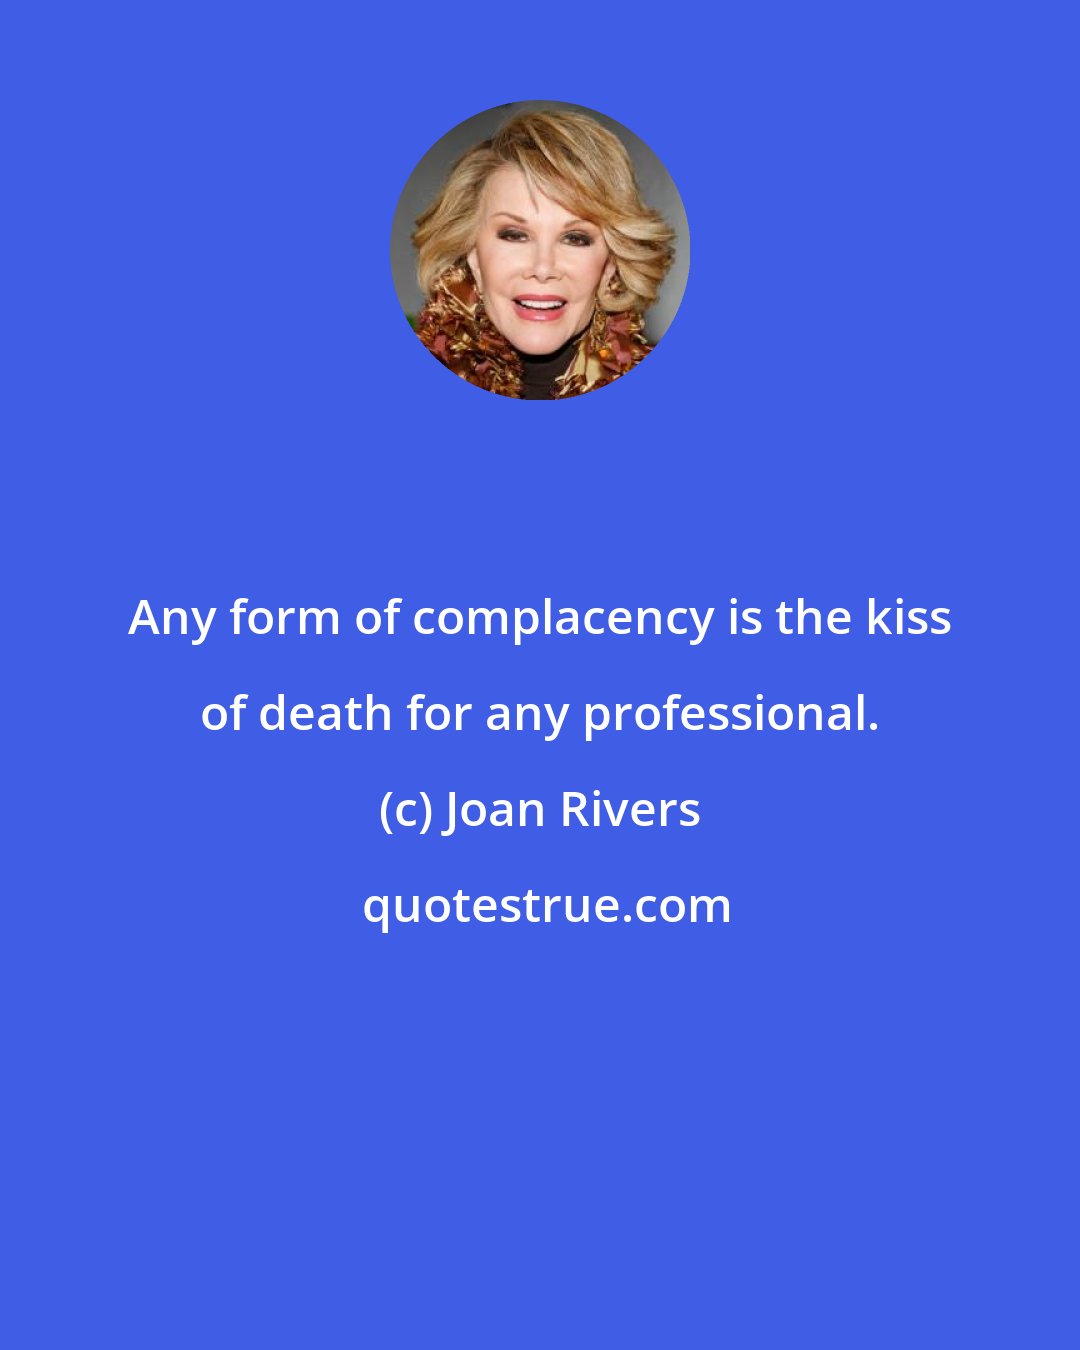 Joan Rivers: Any form of complacency is the kiss of death for any professional.